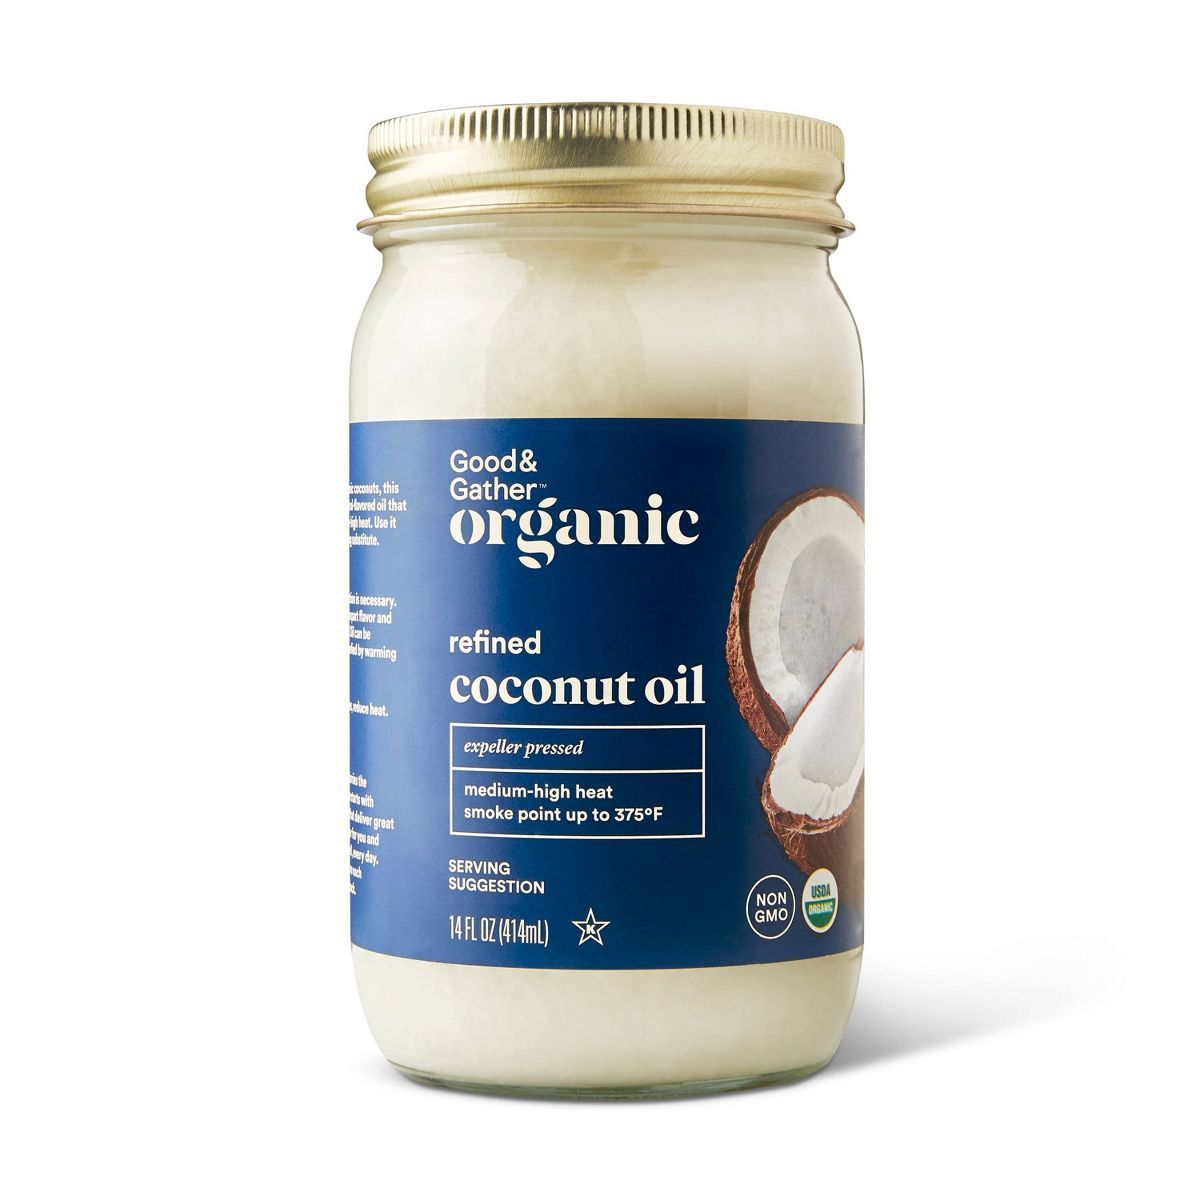 Organic Refined Coconut Oil - Good & Gather™ | Target